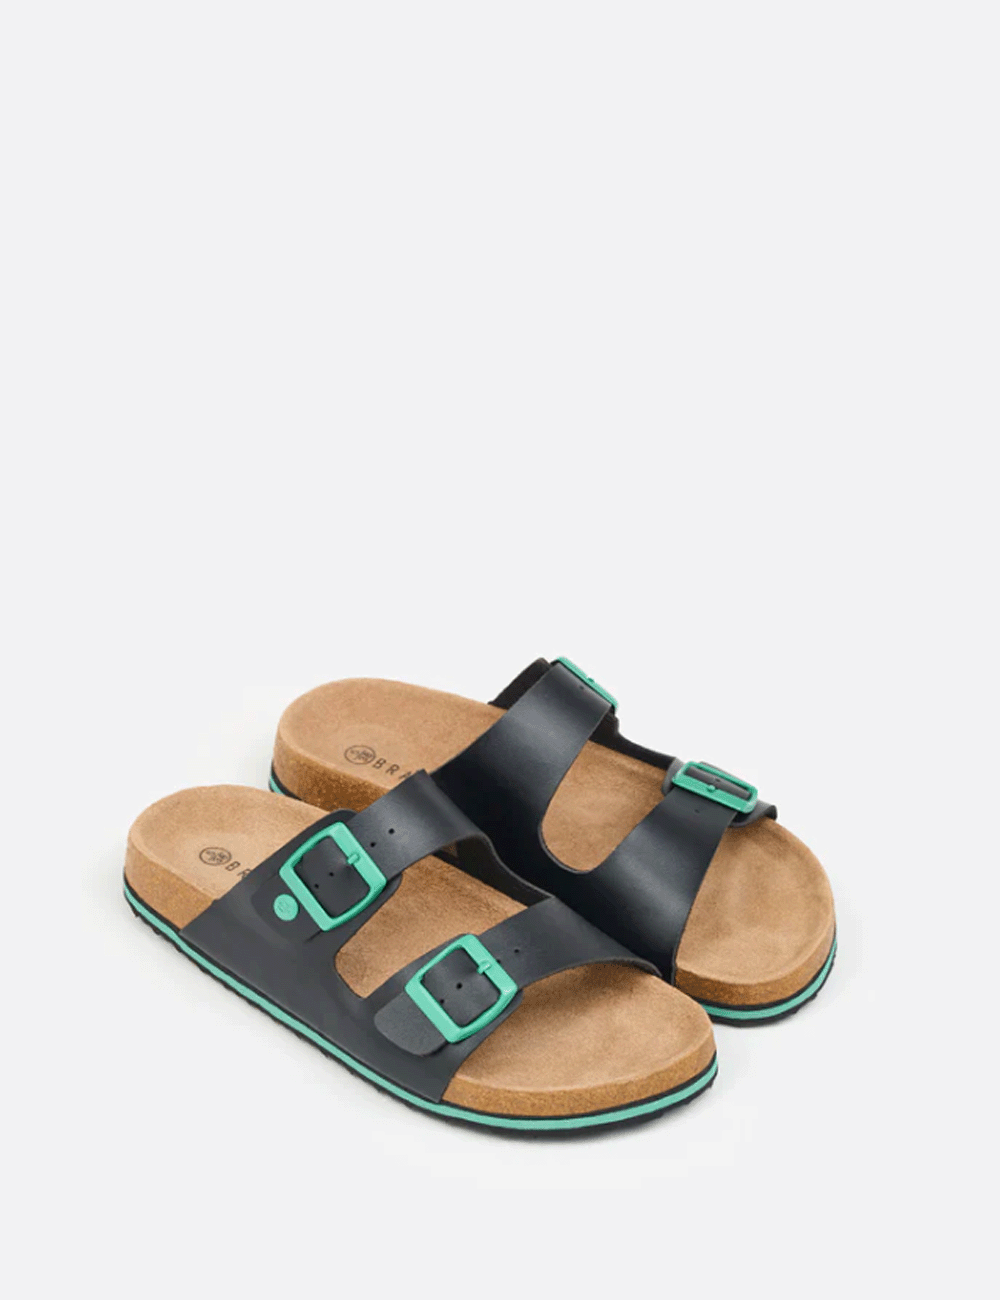 Pair of the Kelly Pop Sandal on a grey background